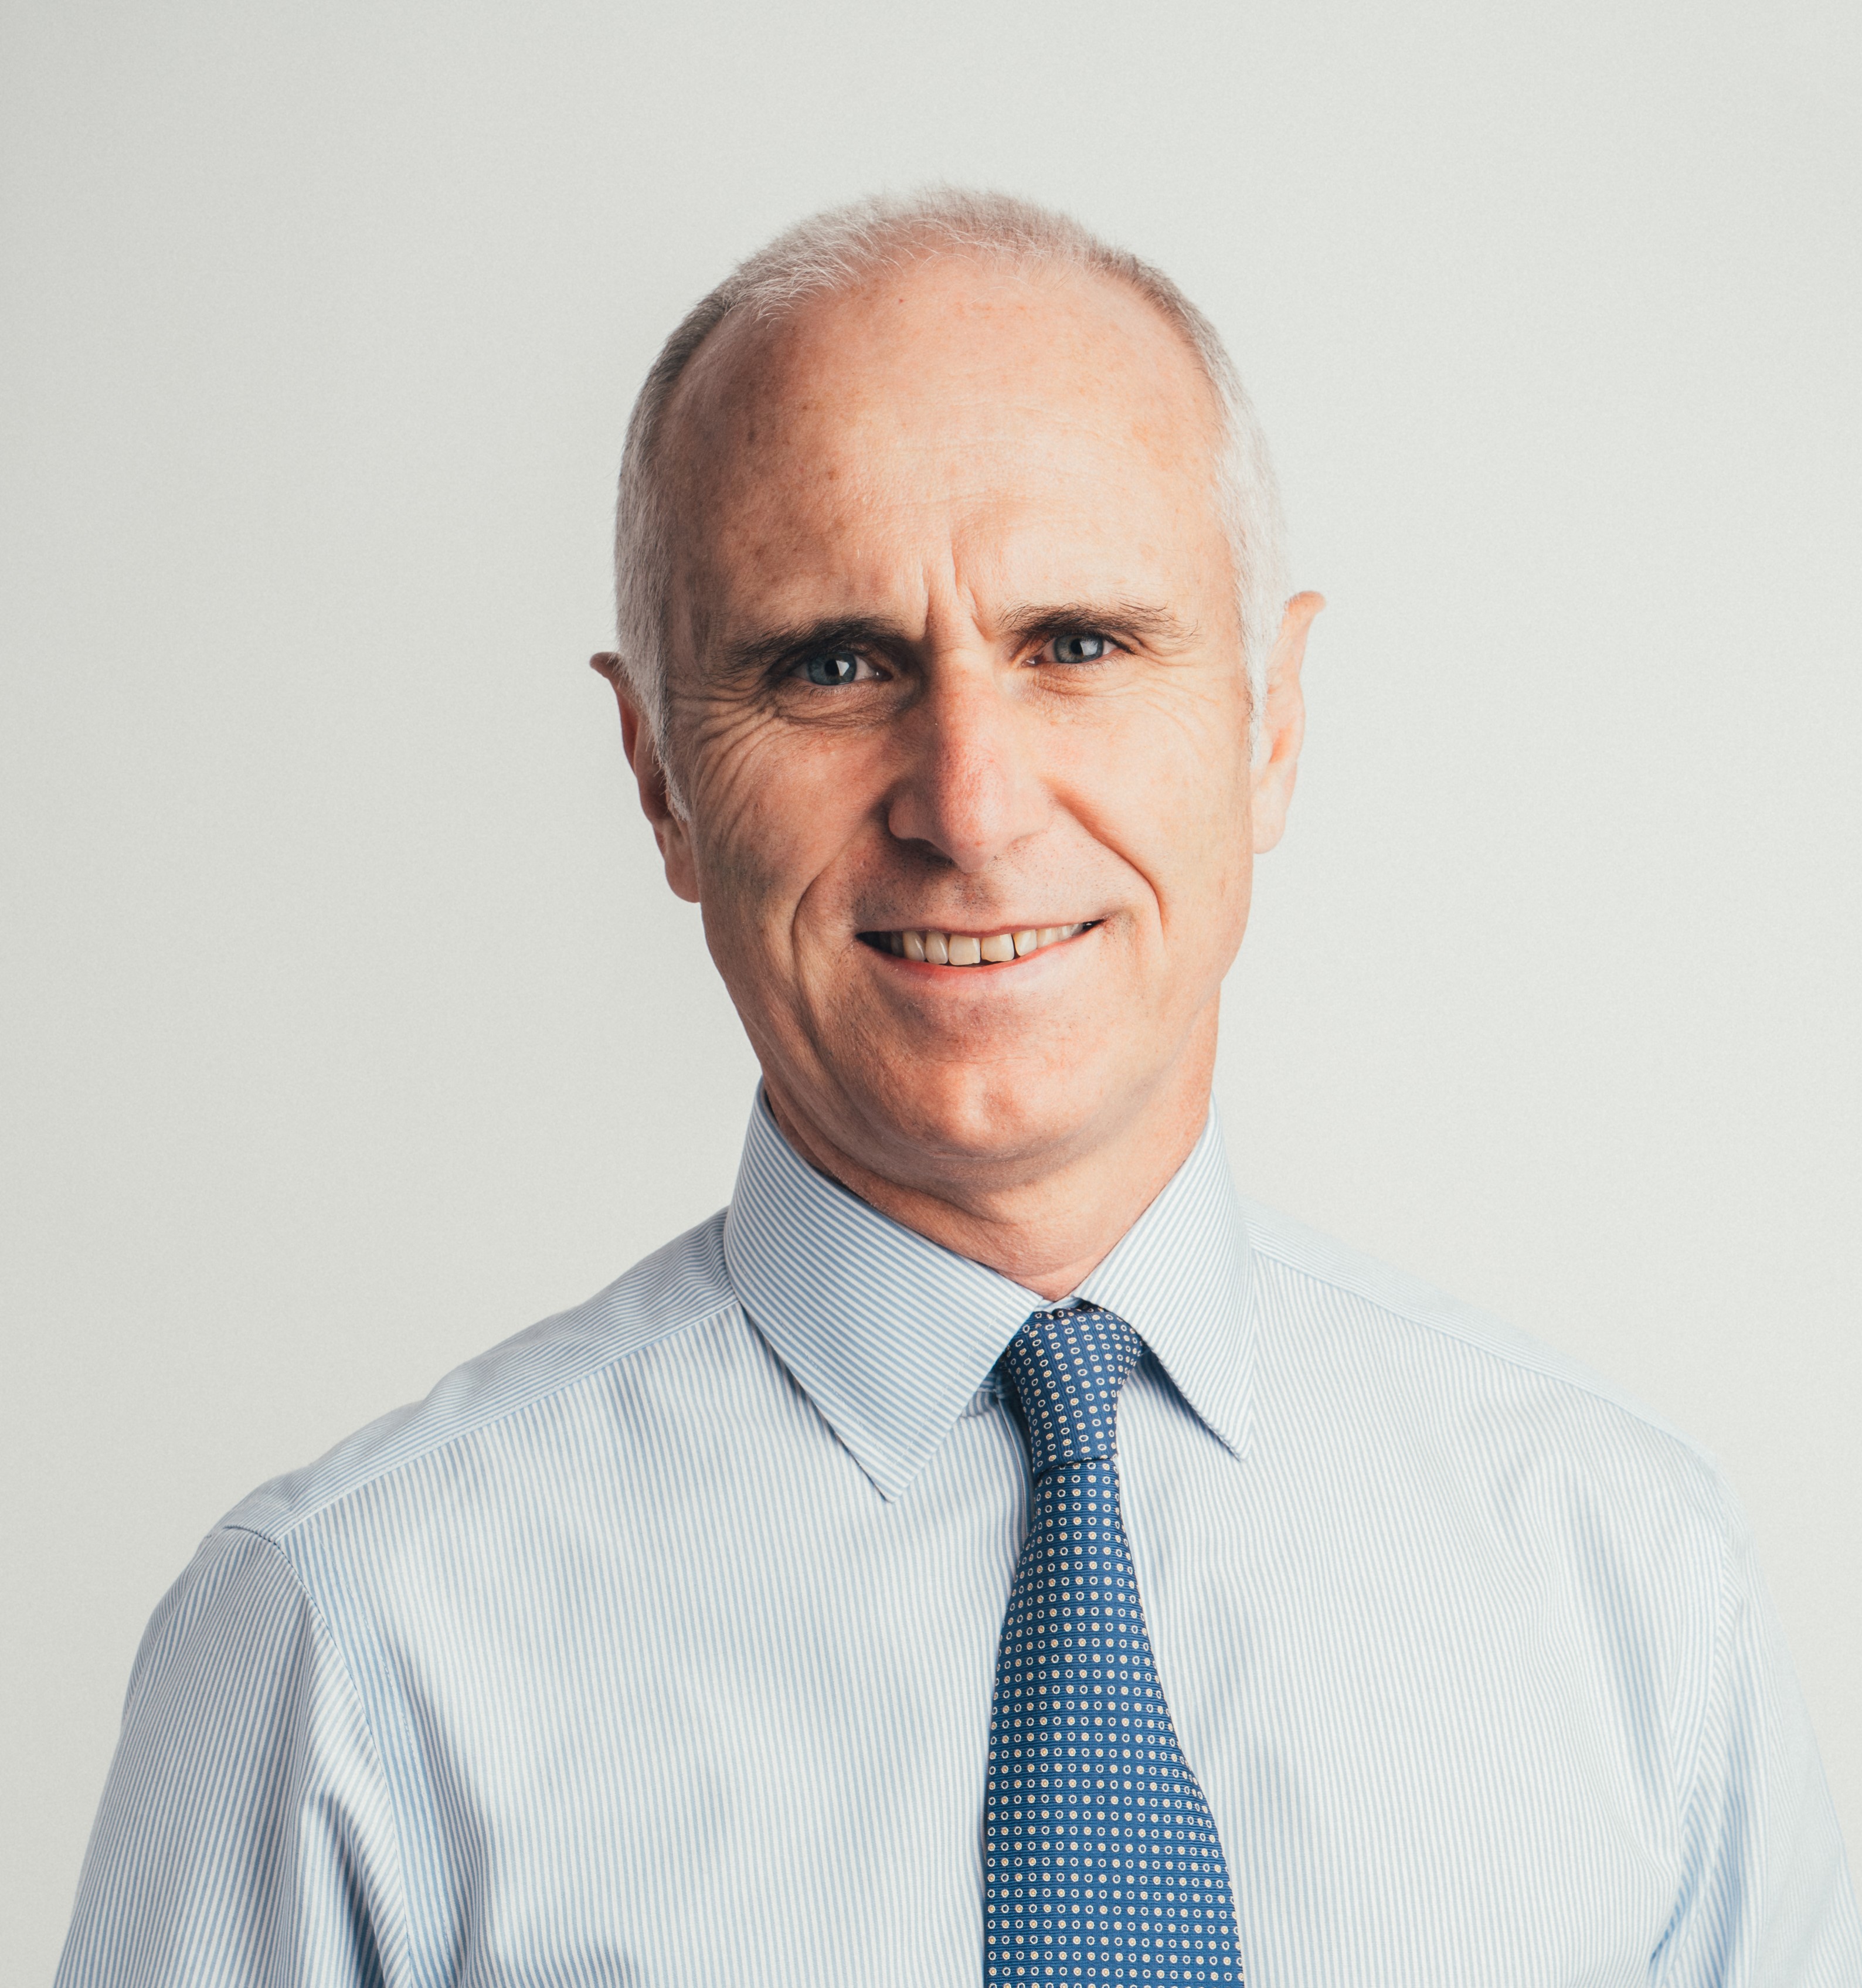 Infineum Chief Executive Officer Trevor Russell to retire, Aldo Govi appointed as his successor